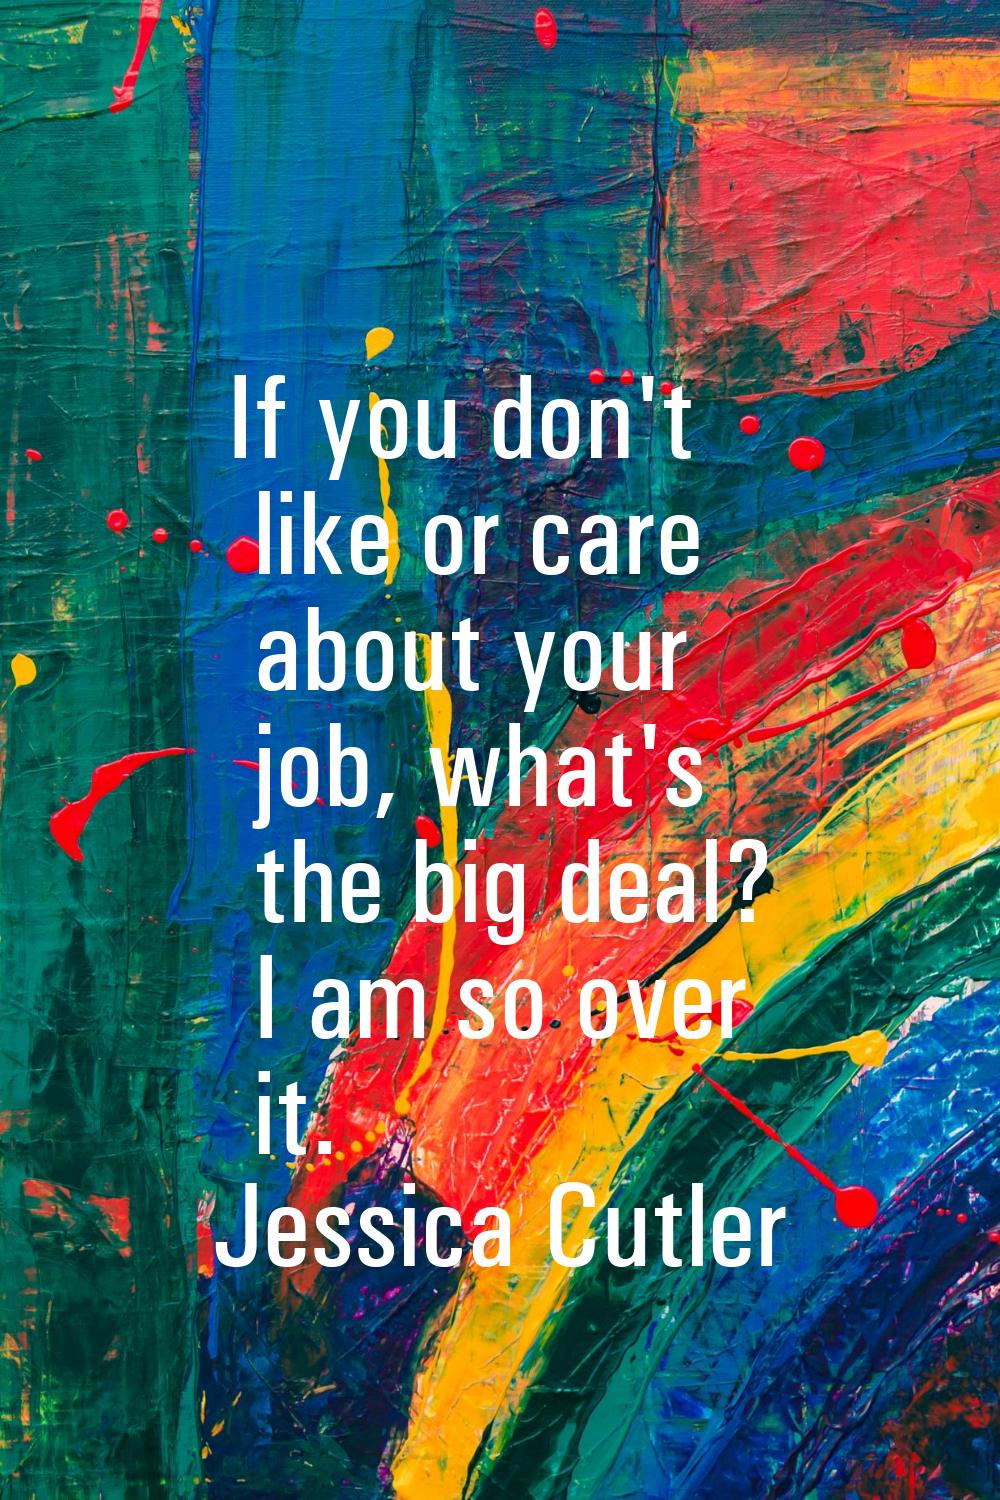 If you don't like or care about your job, what's the big deal? I am so over it.